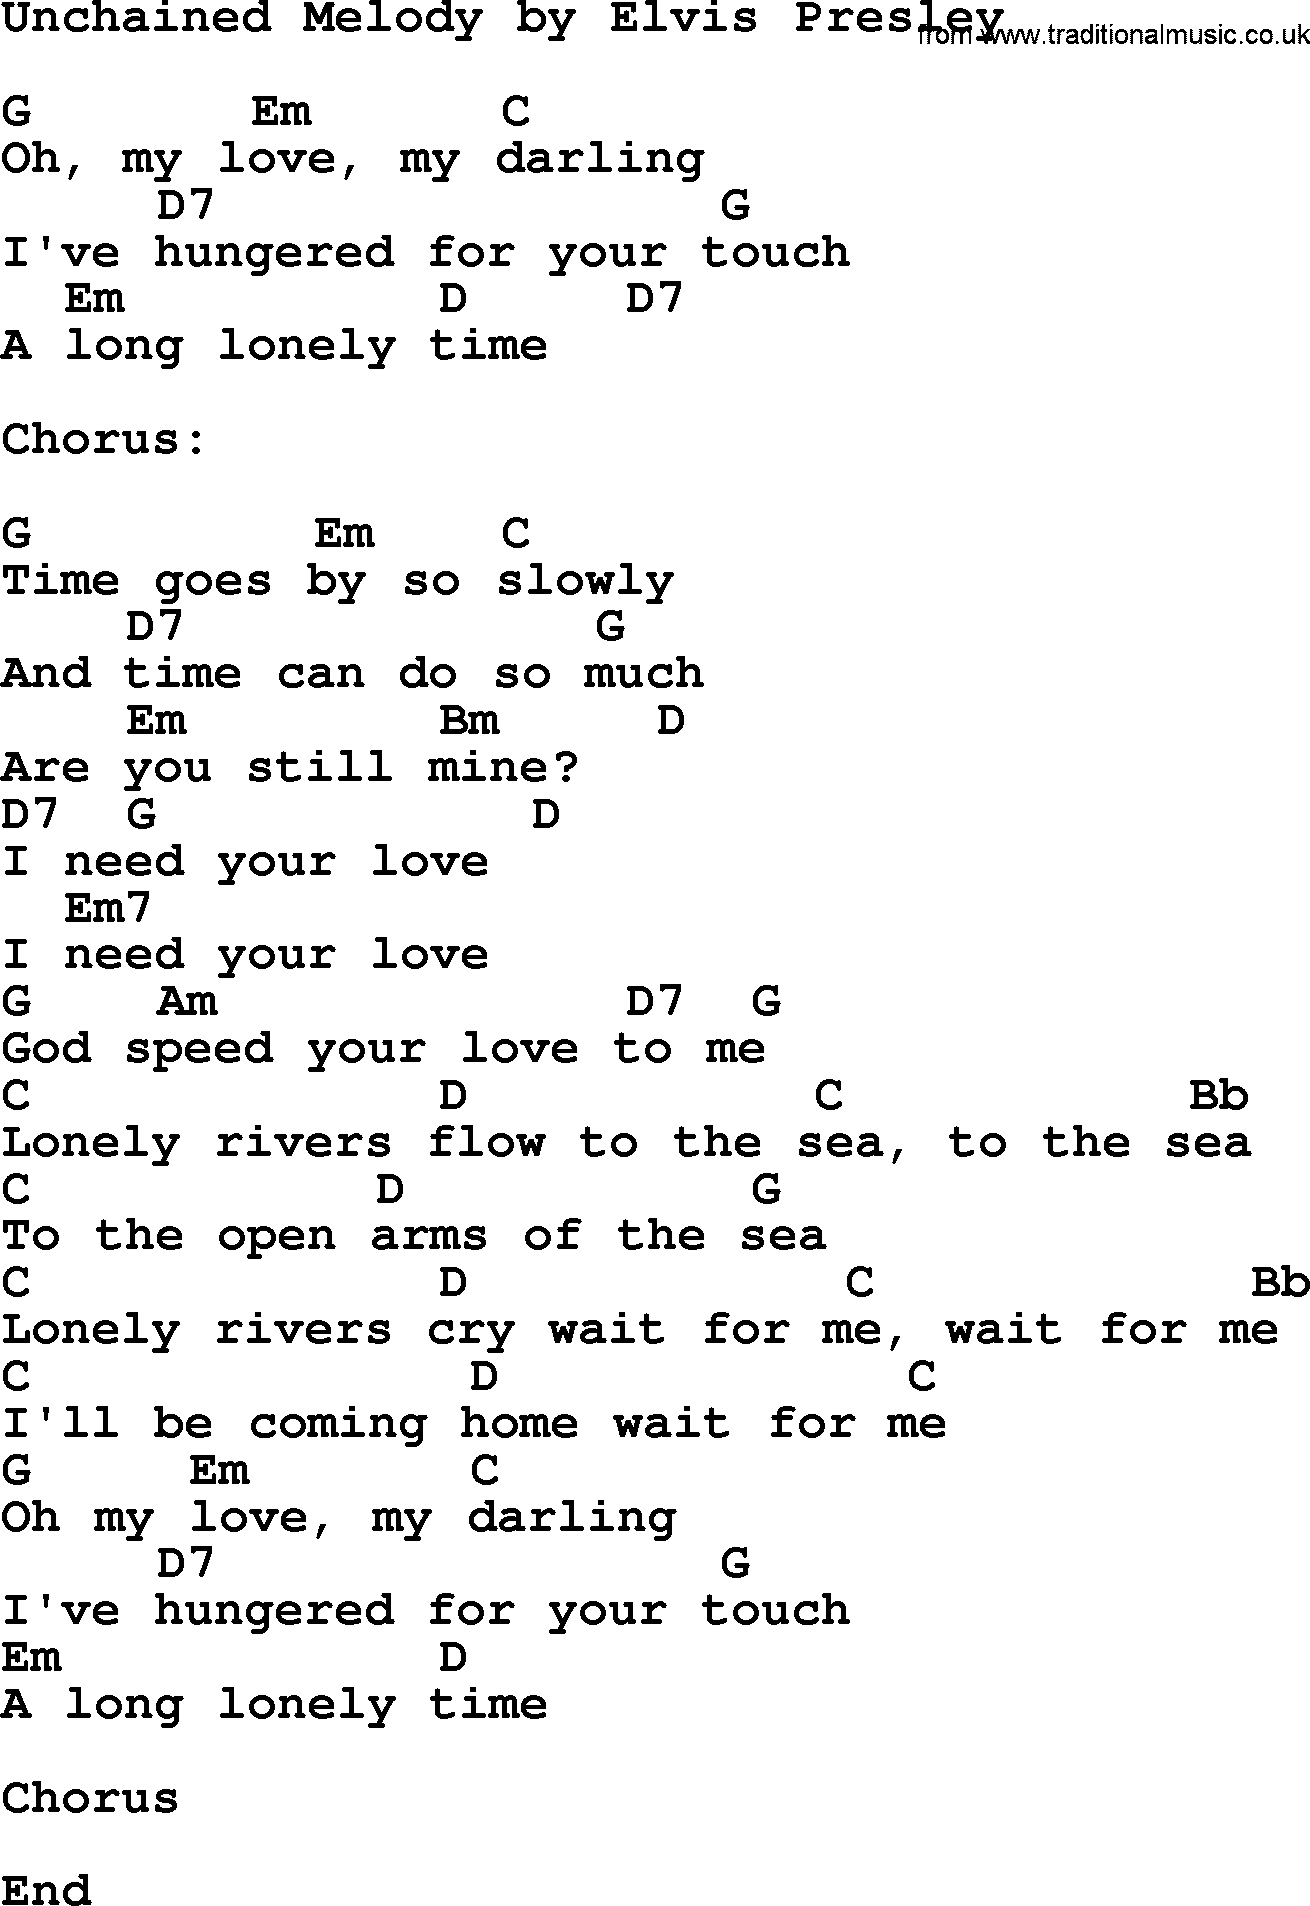 Elvis Presley song: Unchained Melody, lyrics and chords